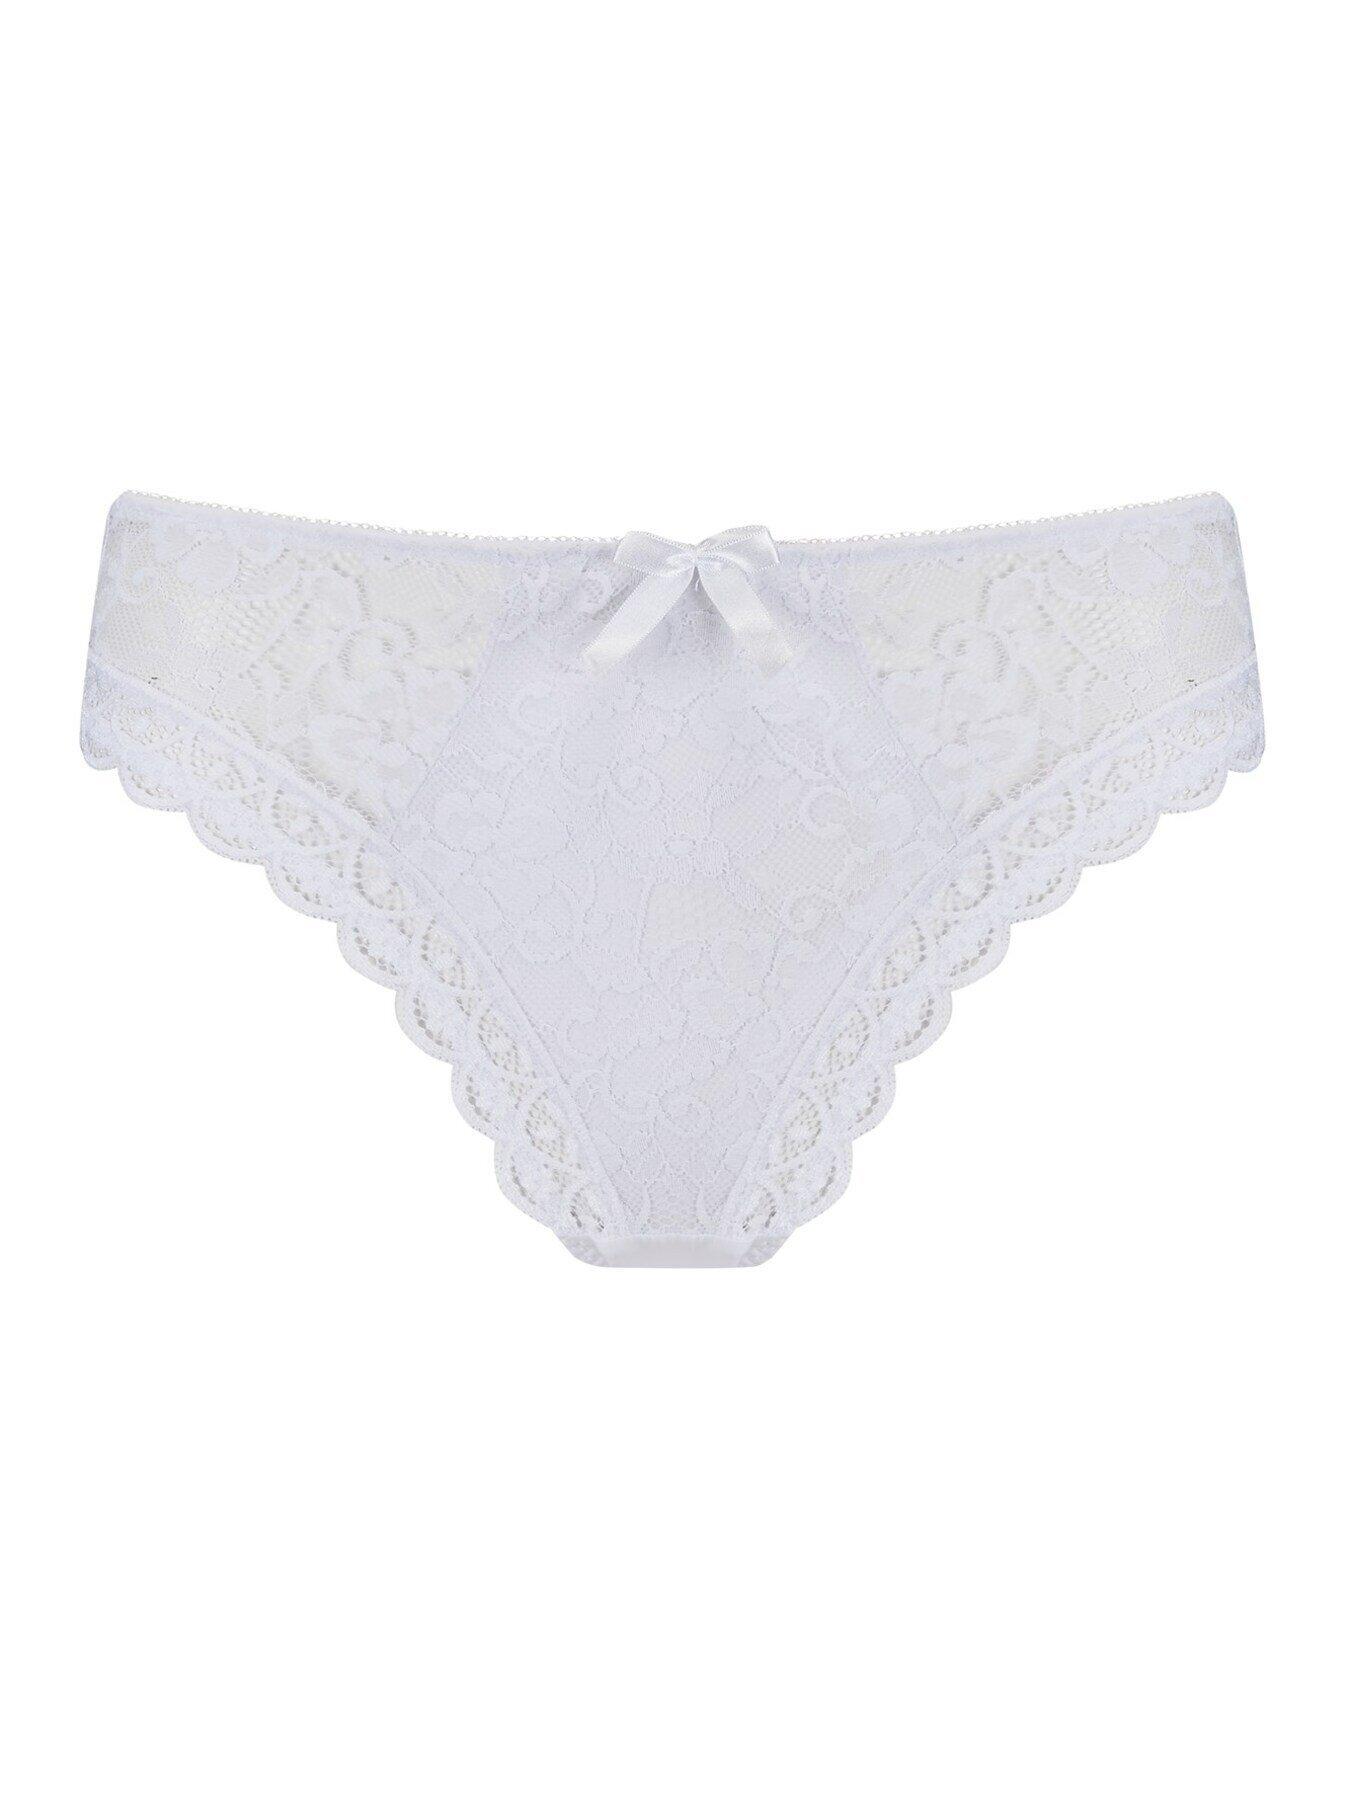 White High Waisted Knickers made in the UK - What Katie Did